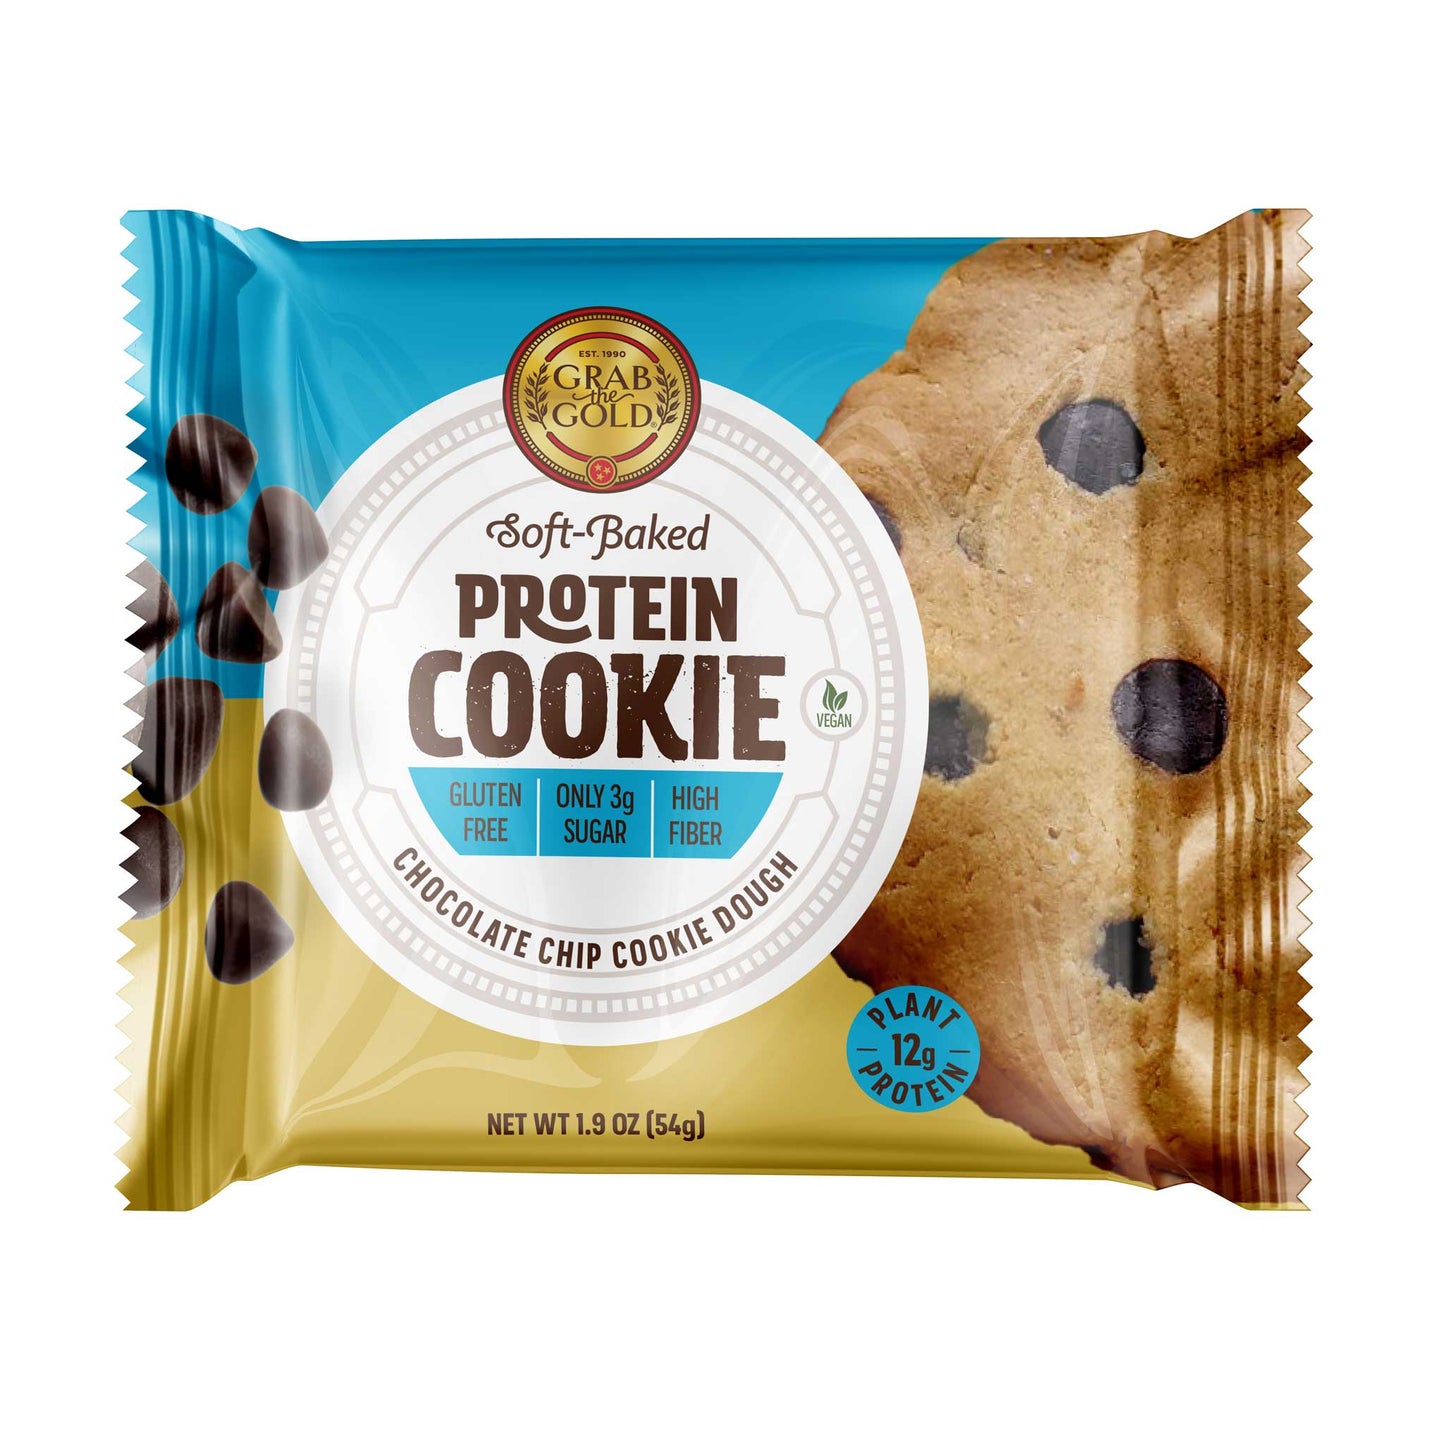 New & Improved Protein Cookies Coming Soon!